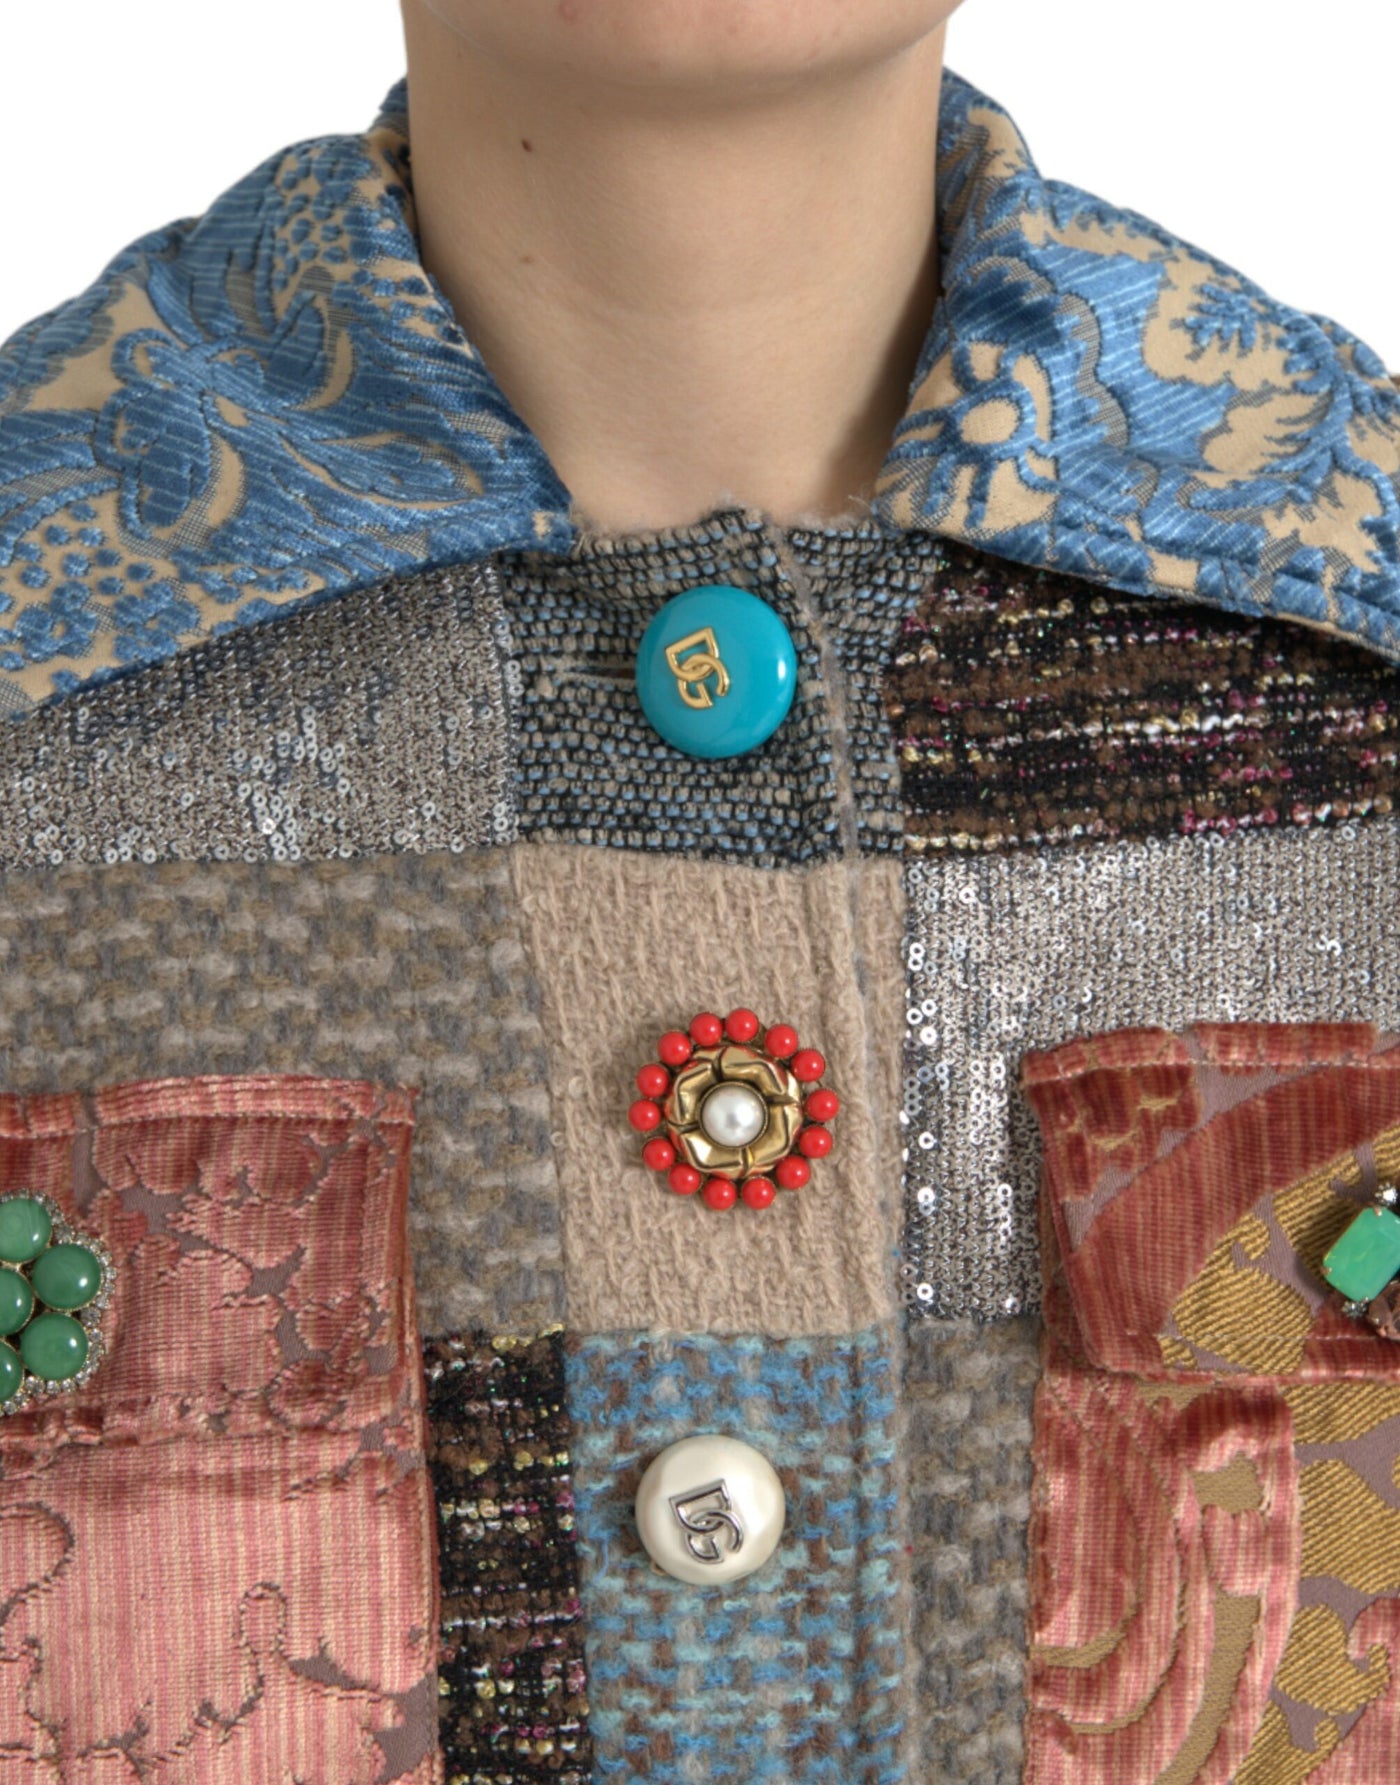 Dolce & Gabbana Multicolor Patchwork Trench Coat Jacket